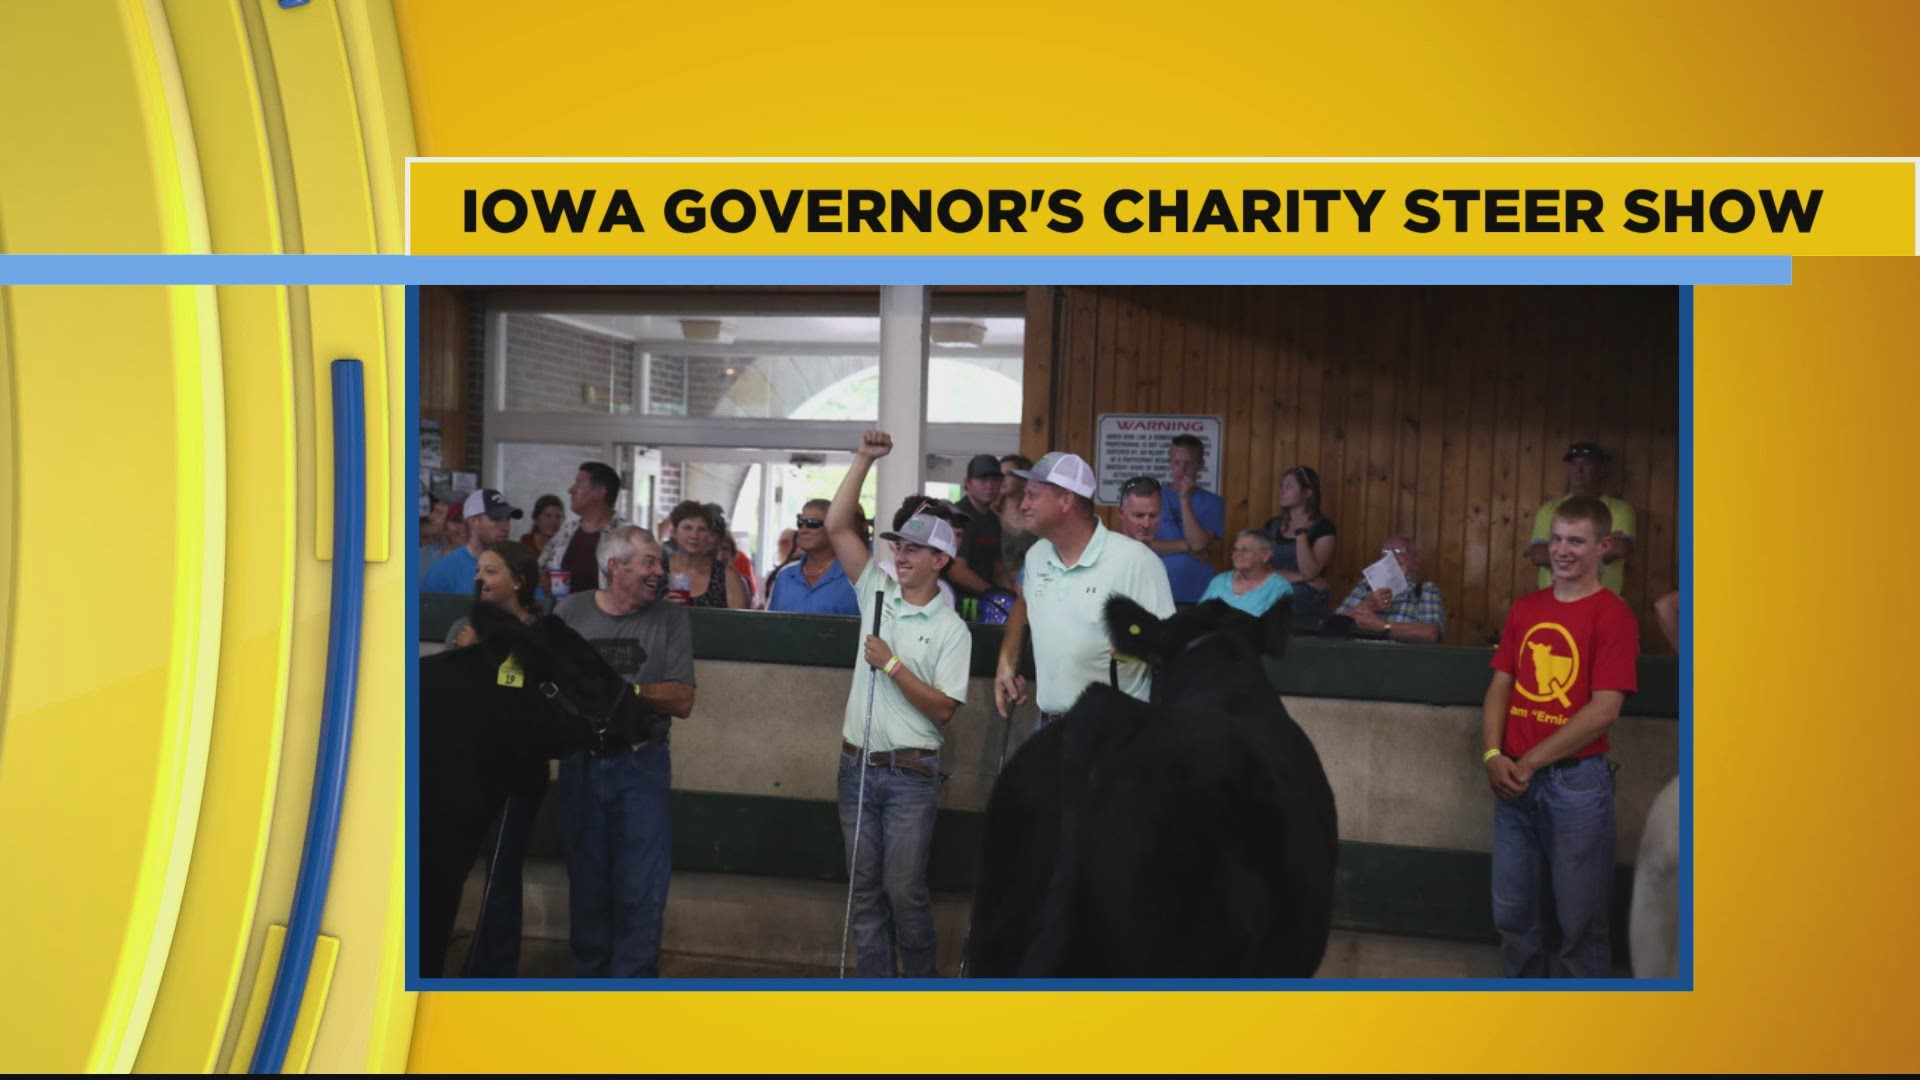 Take a sneak peek at the arena before the Iowa Governor Charity Steer Show